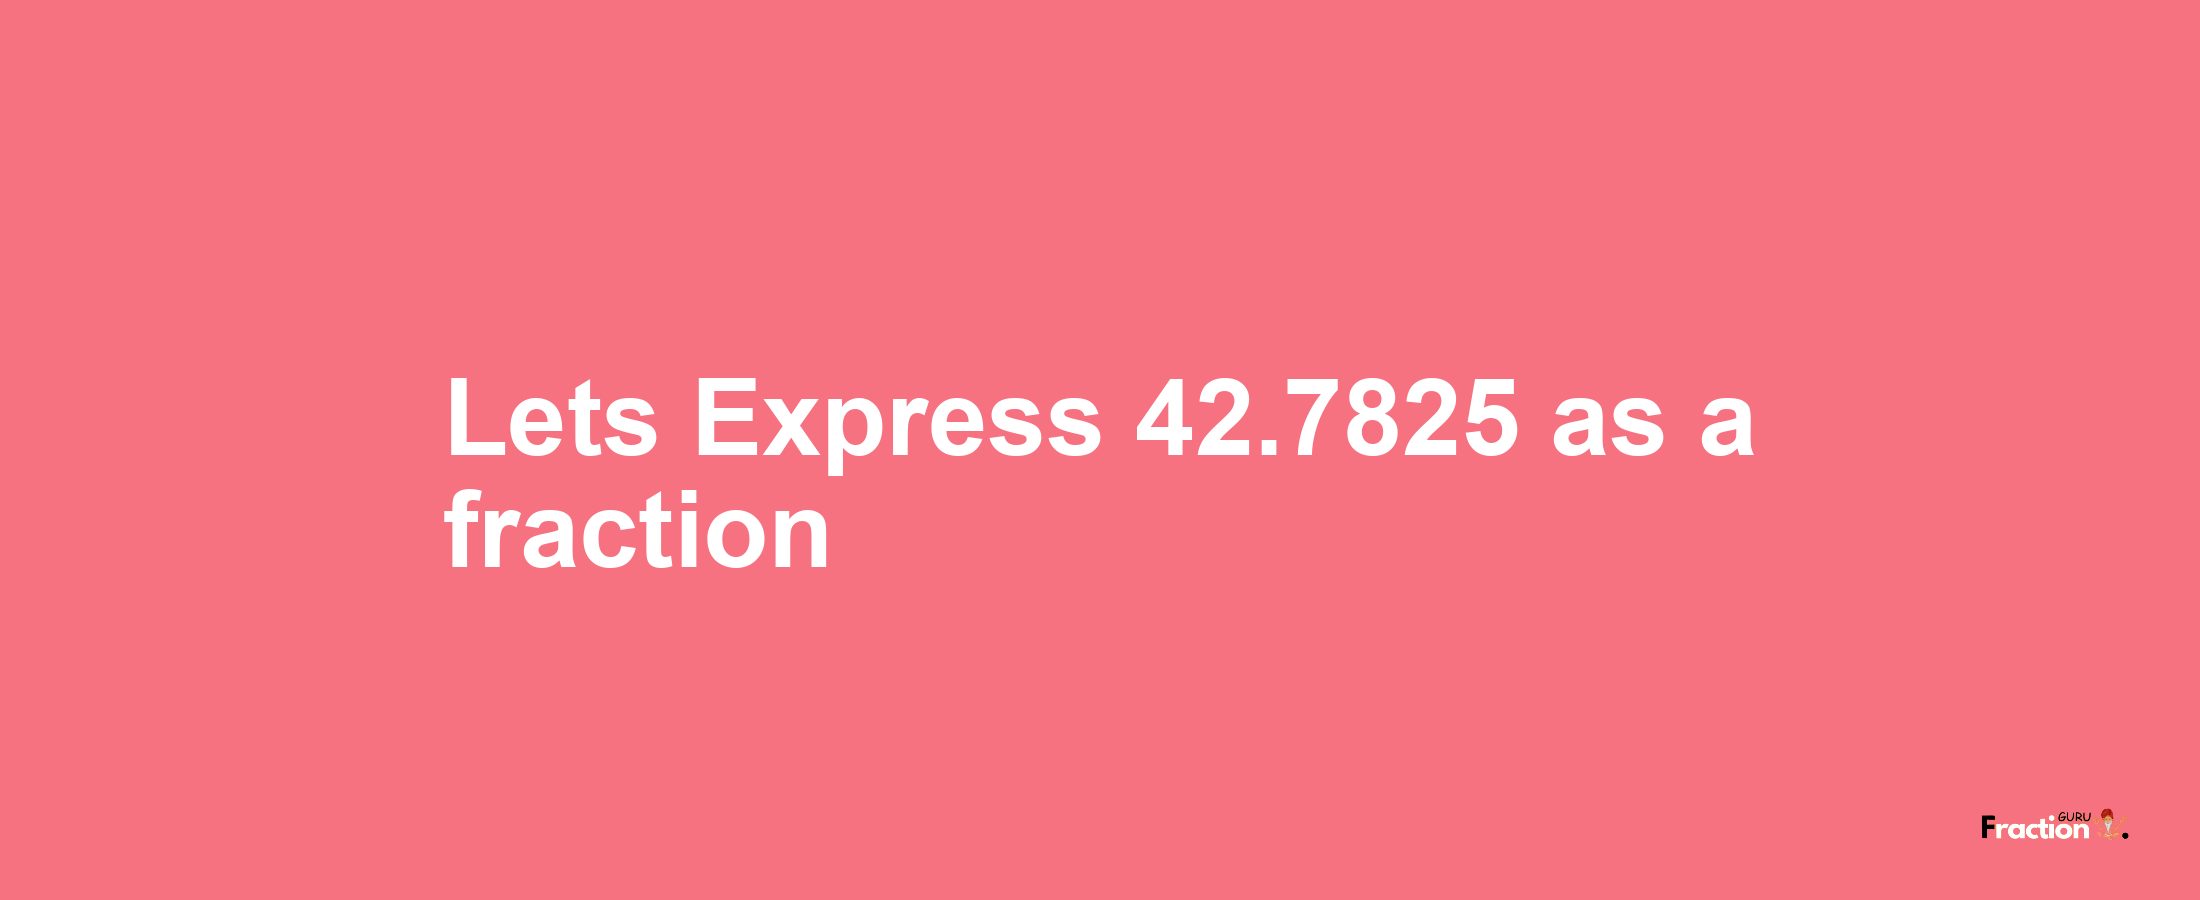 Lets Express 42.7825 as afraction